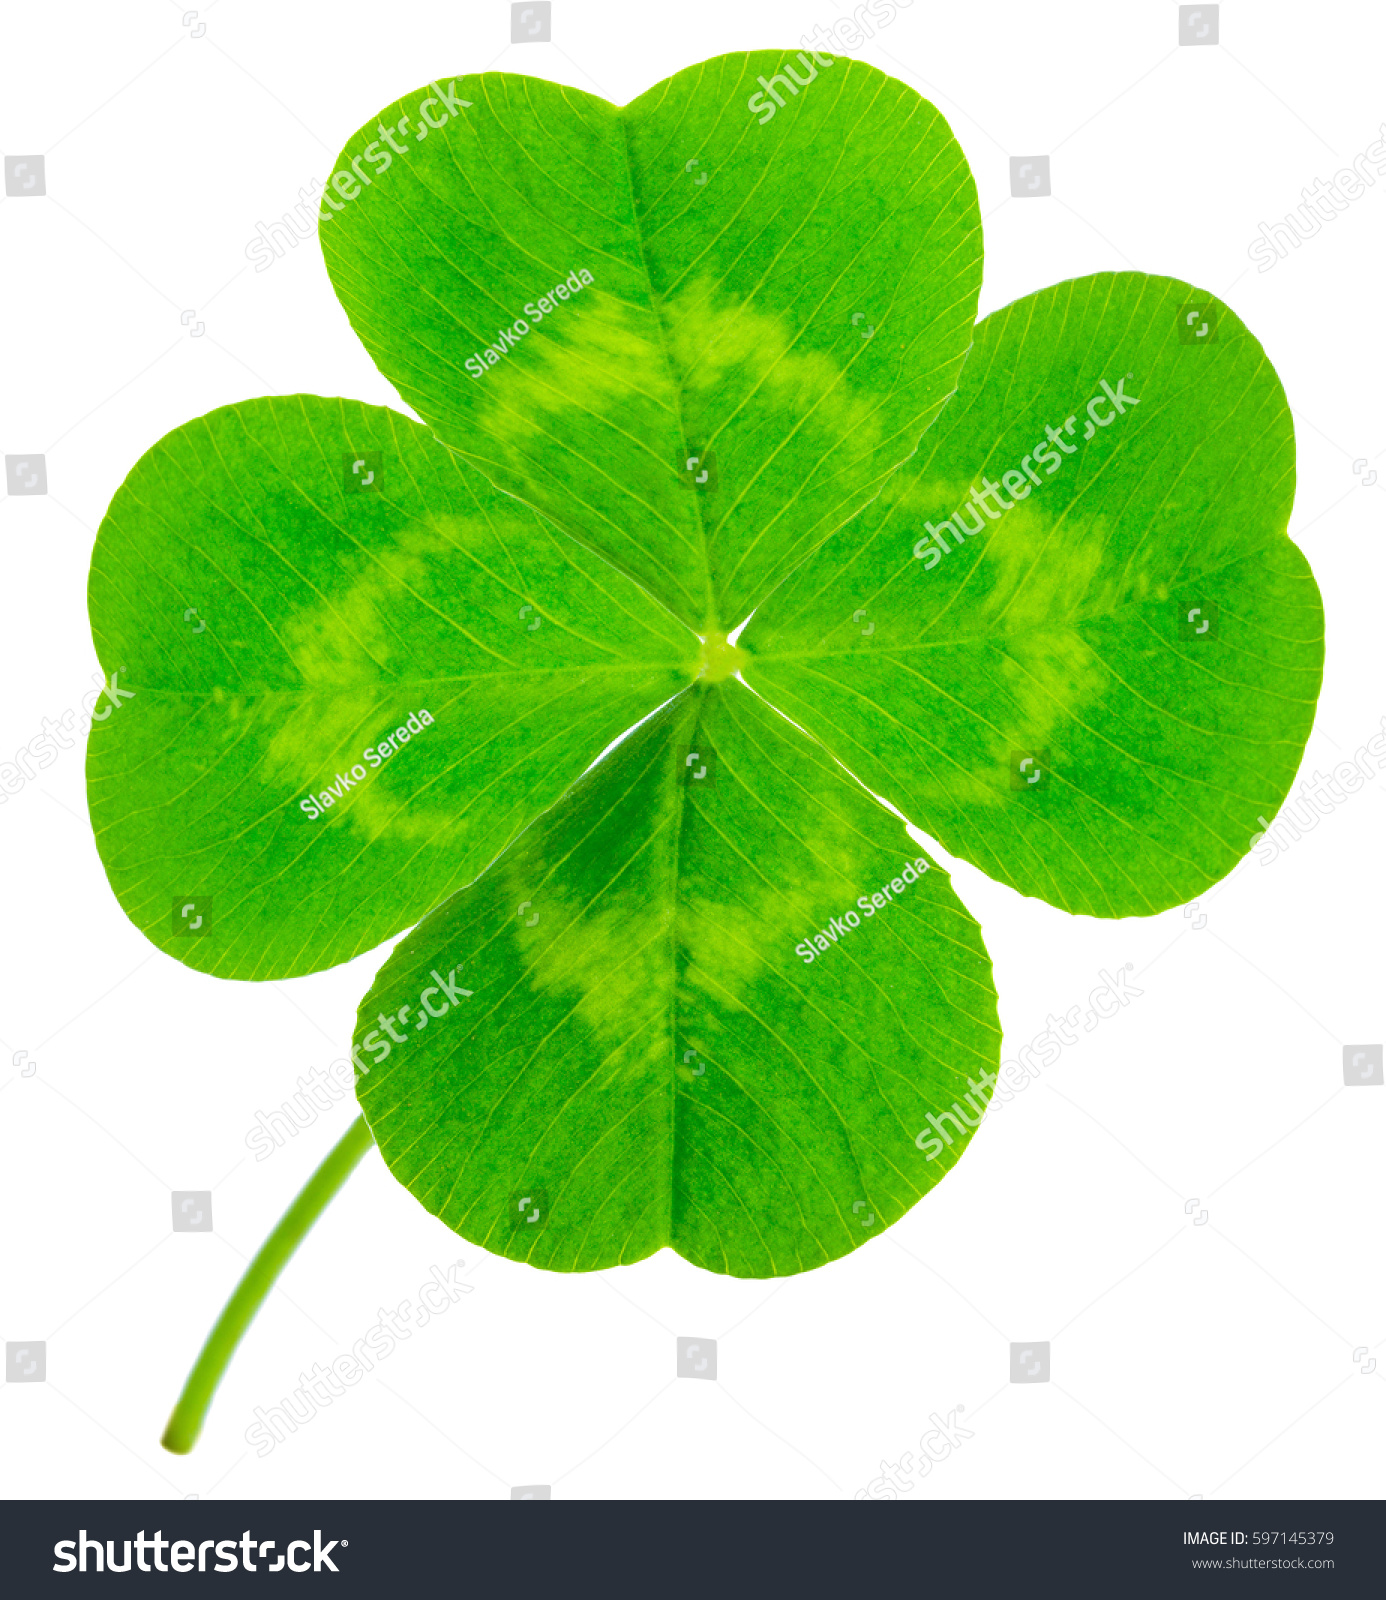 St. Patrick's Day symbol. Lucky shamrock clover green heart-shaped leaves isolated on white background in 1:1 macro lens shot #597145379